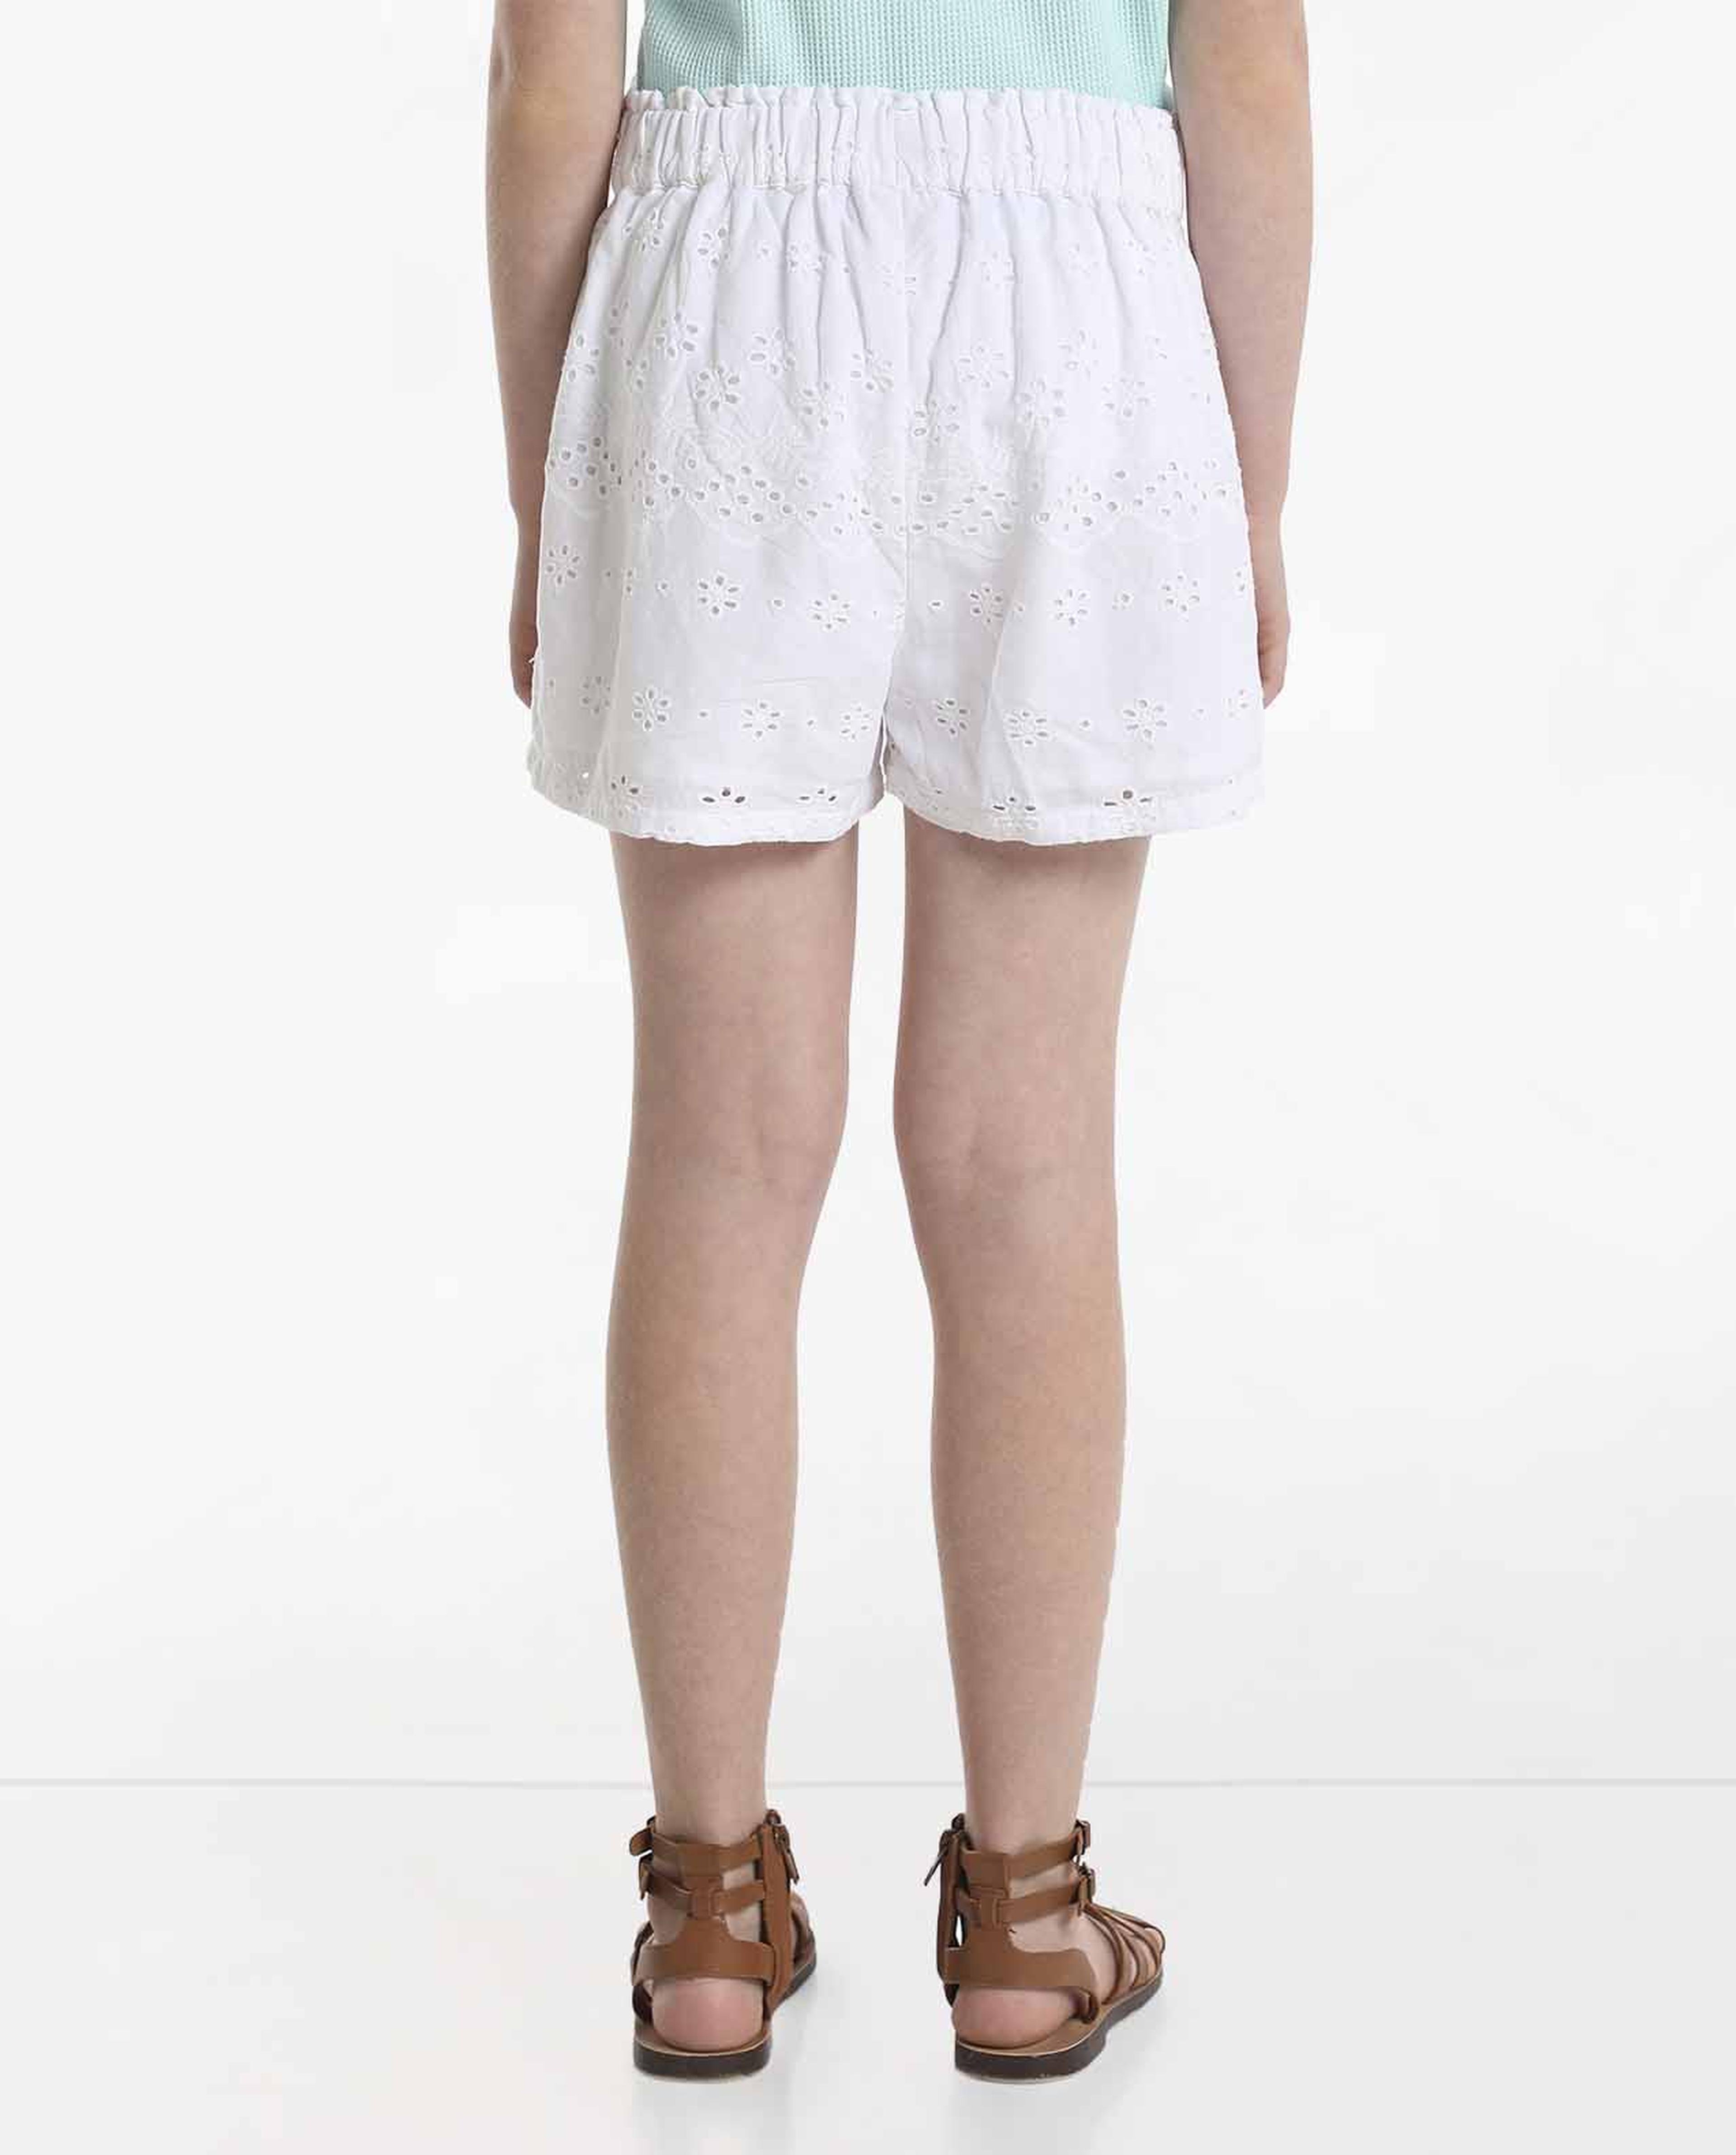 Shifley Woven Shorts with Elasticated Tie-Up Waist